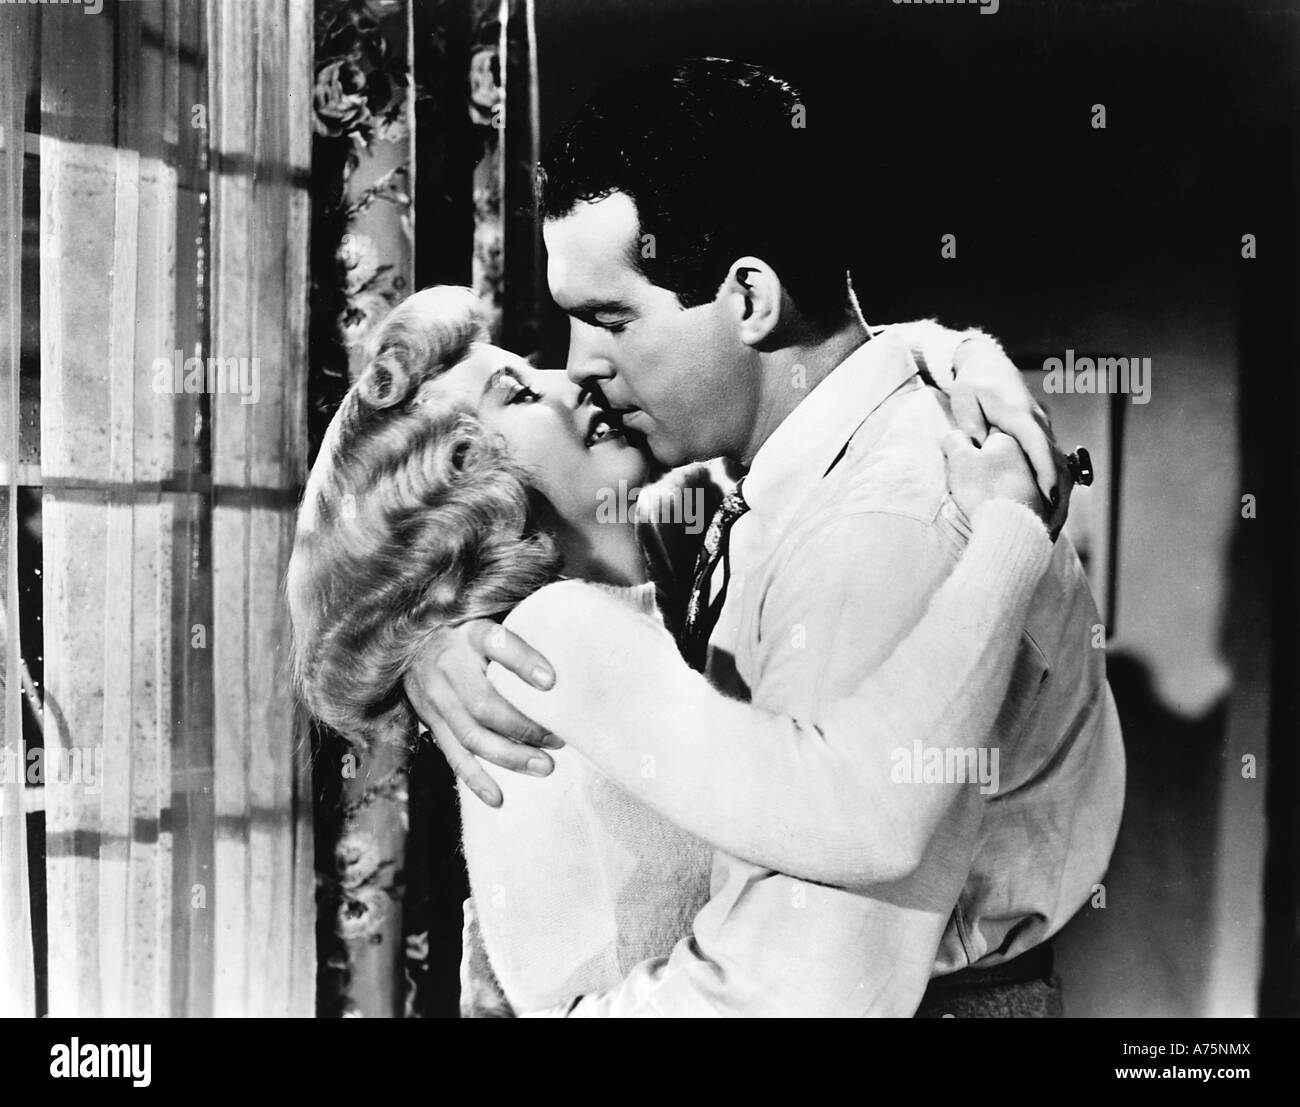 DOUBLE INDEMNITÉ - 1944 film Paramount avec Barbara Stanwyck et Fred MacMurray Banque D'Images